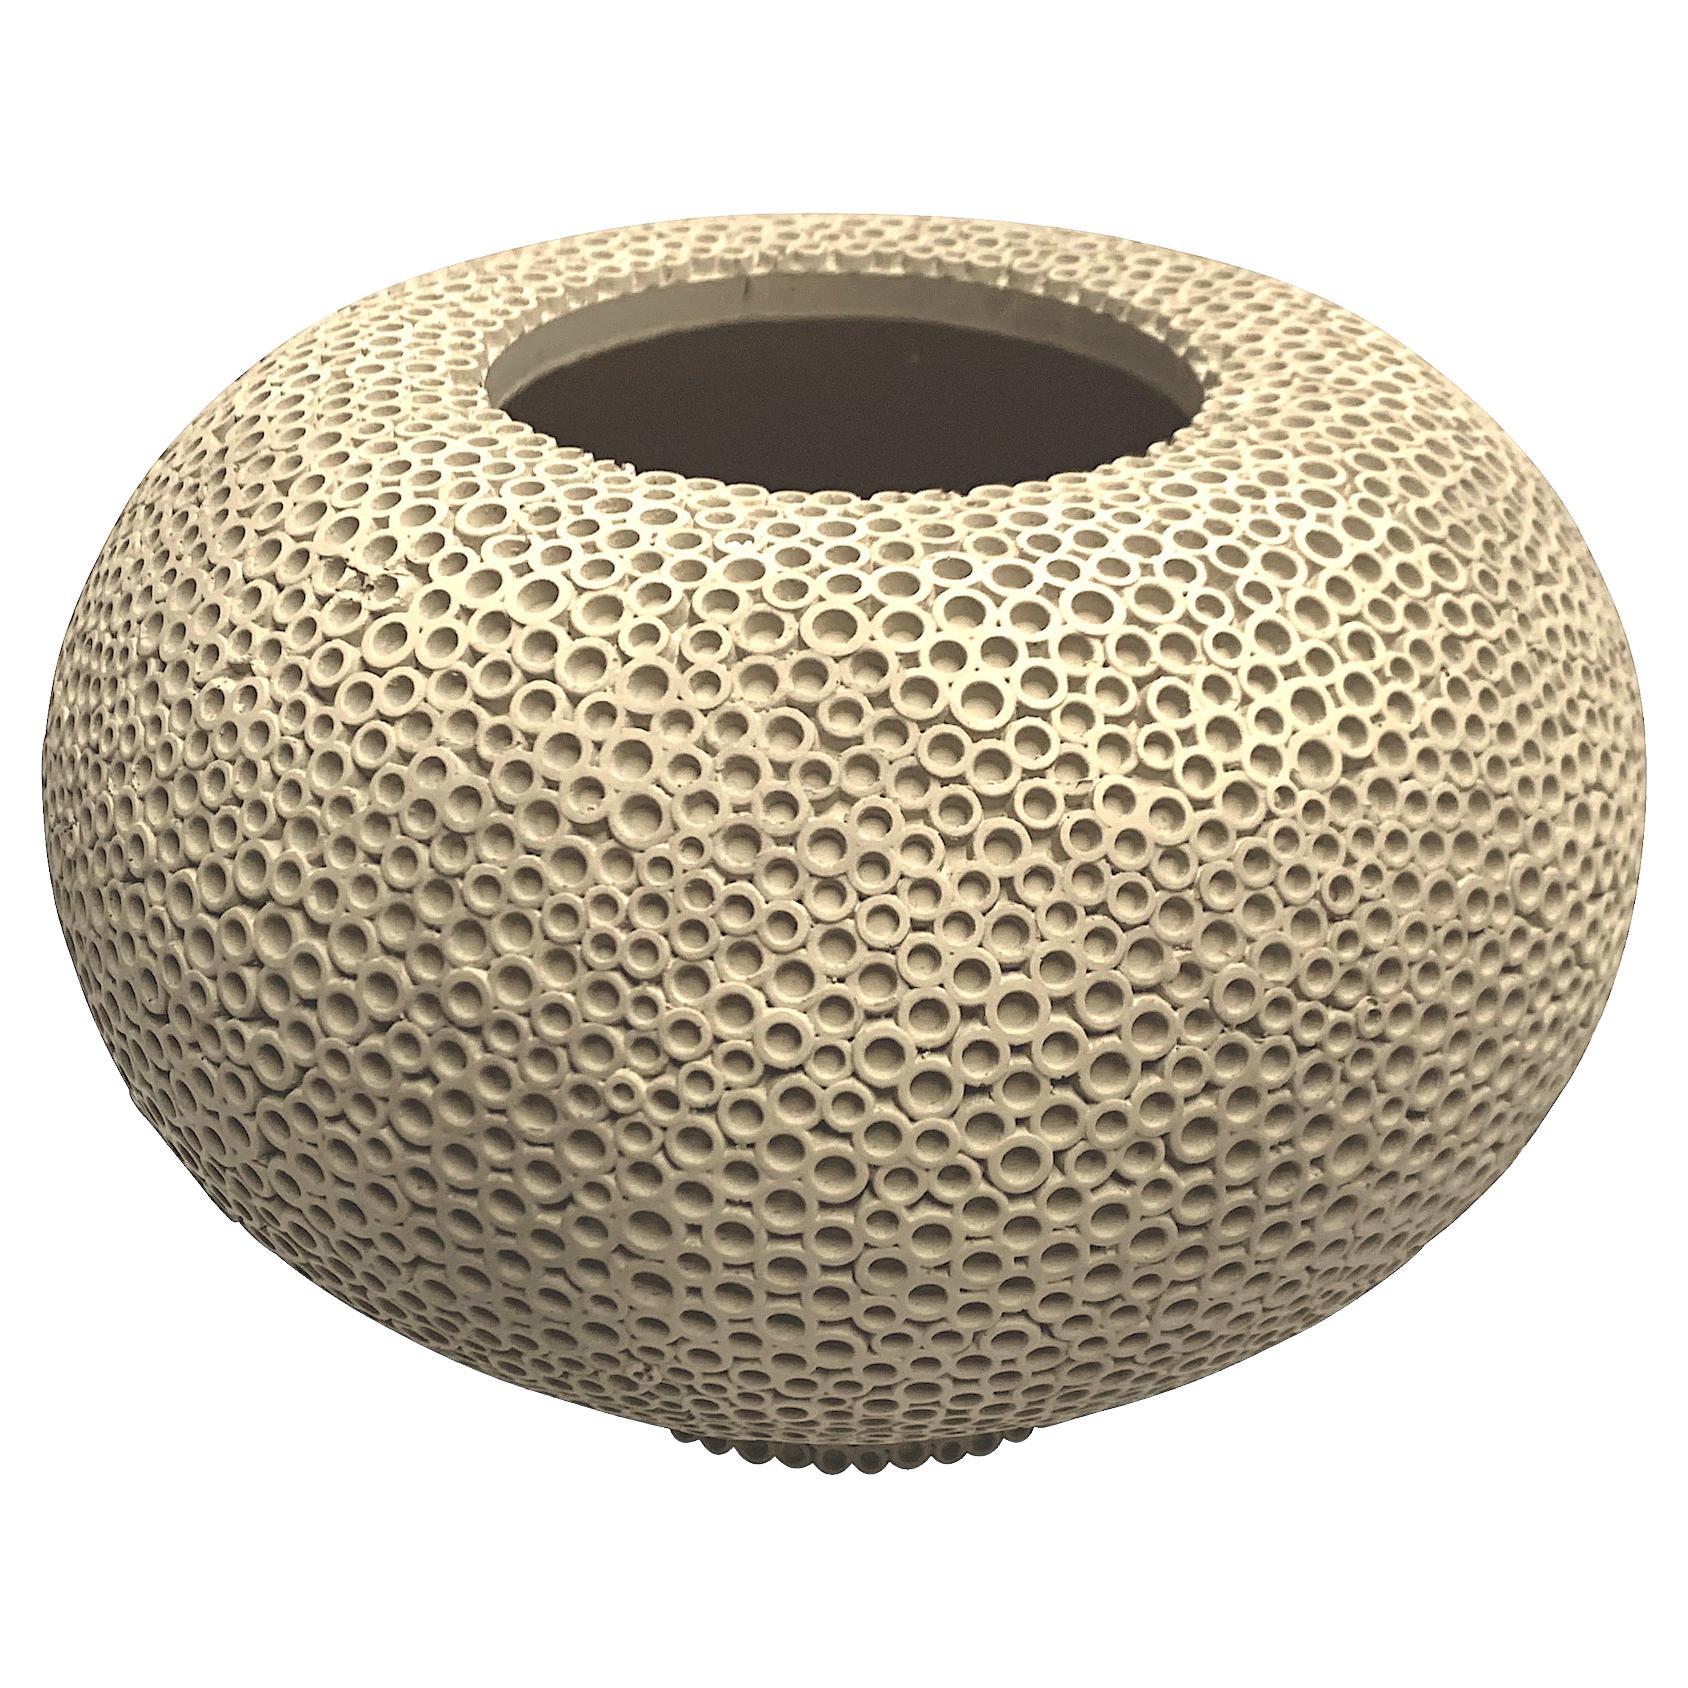 Sand Color Textured Danish Design Round Vase, China, Contemporary For Sale